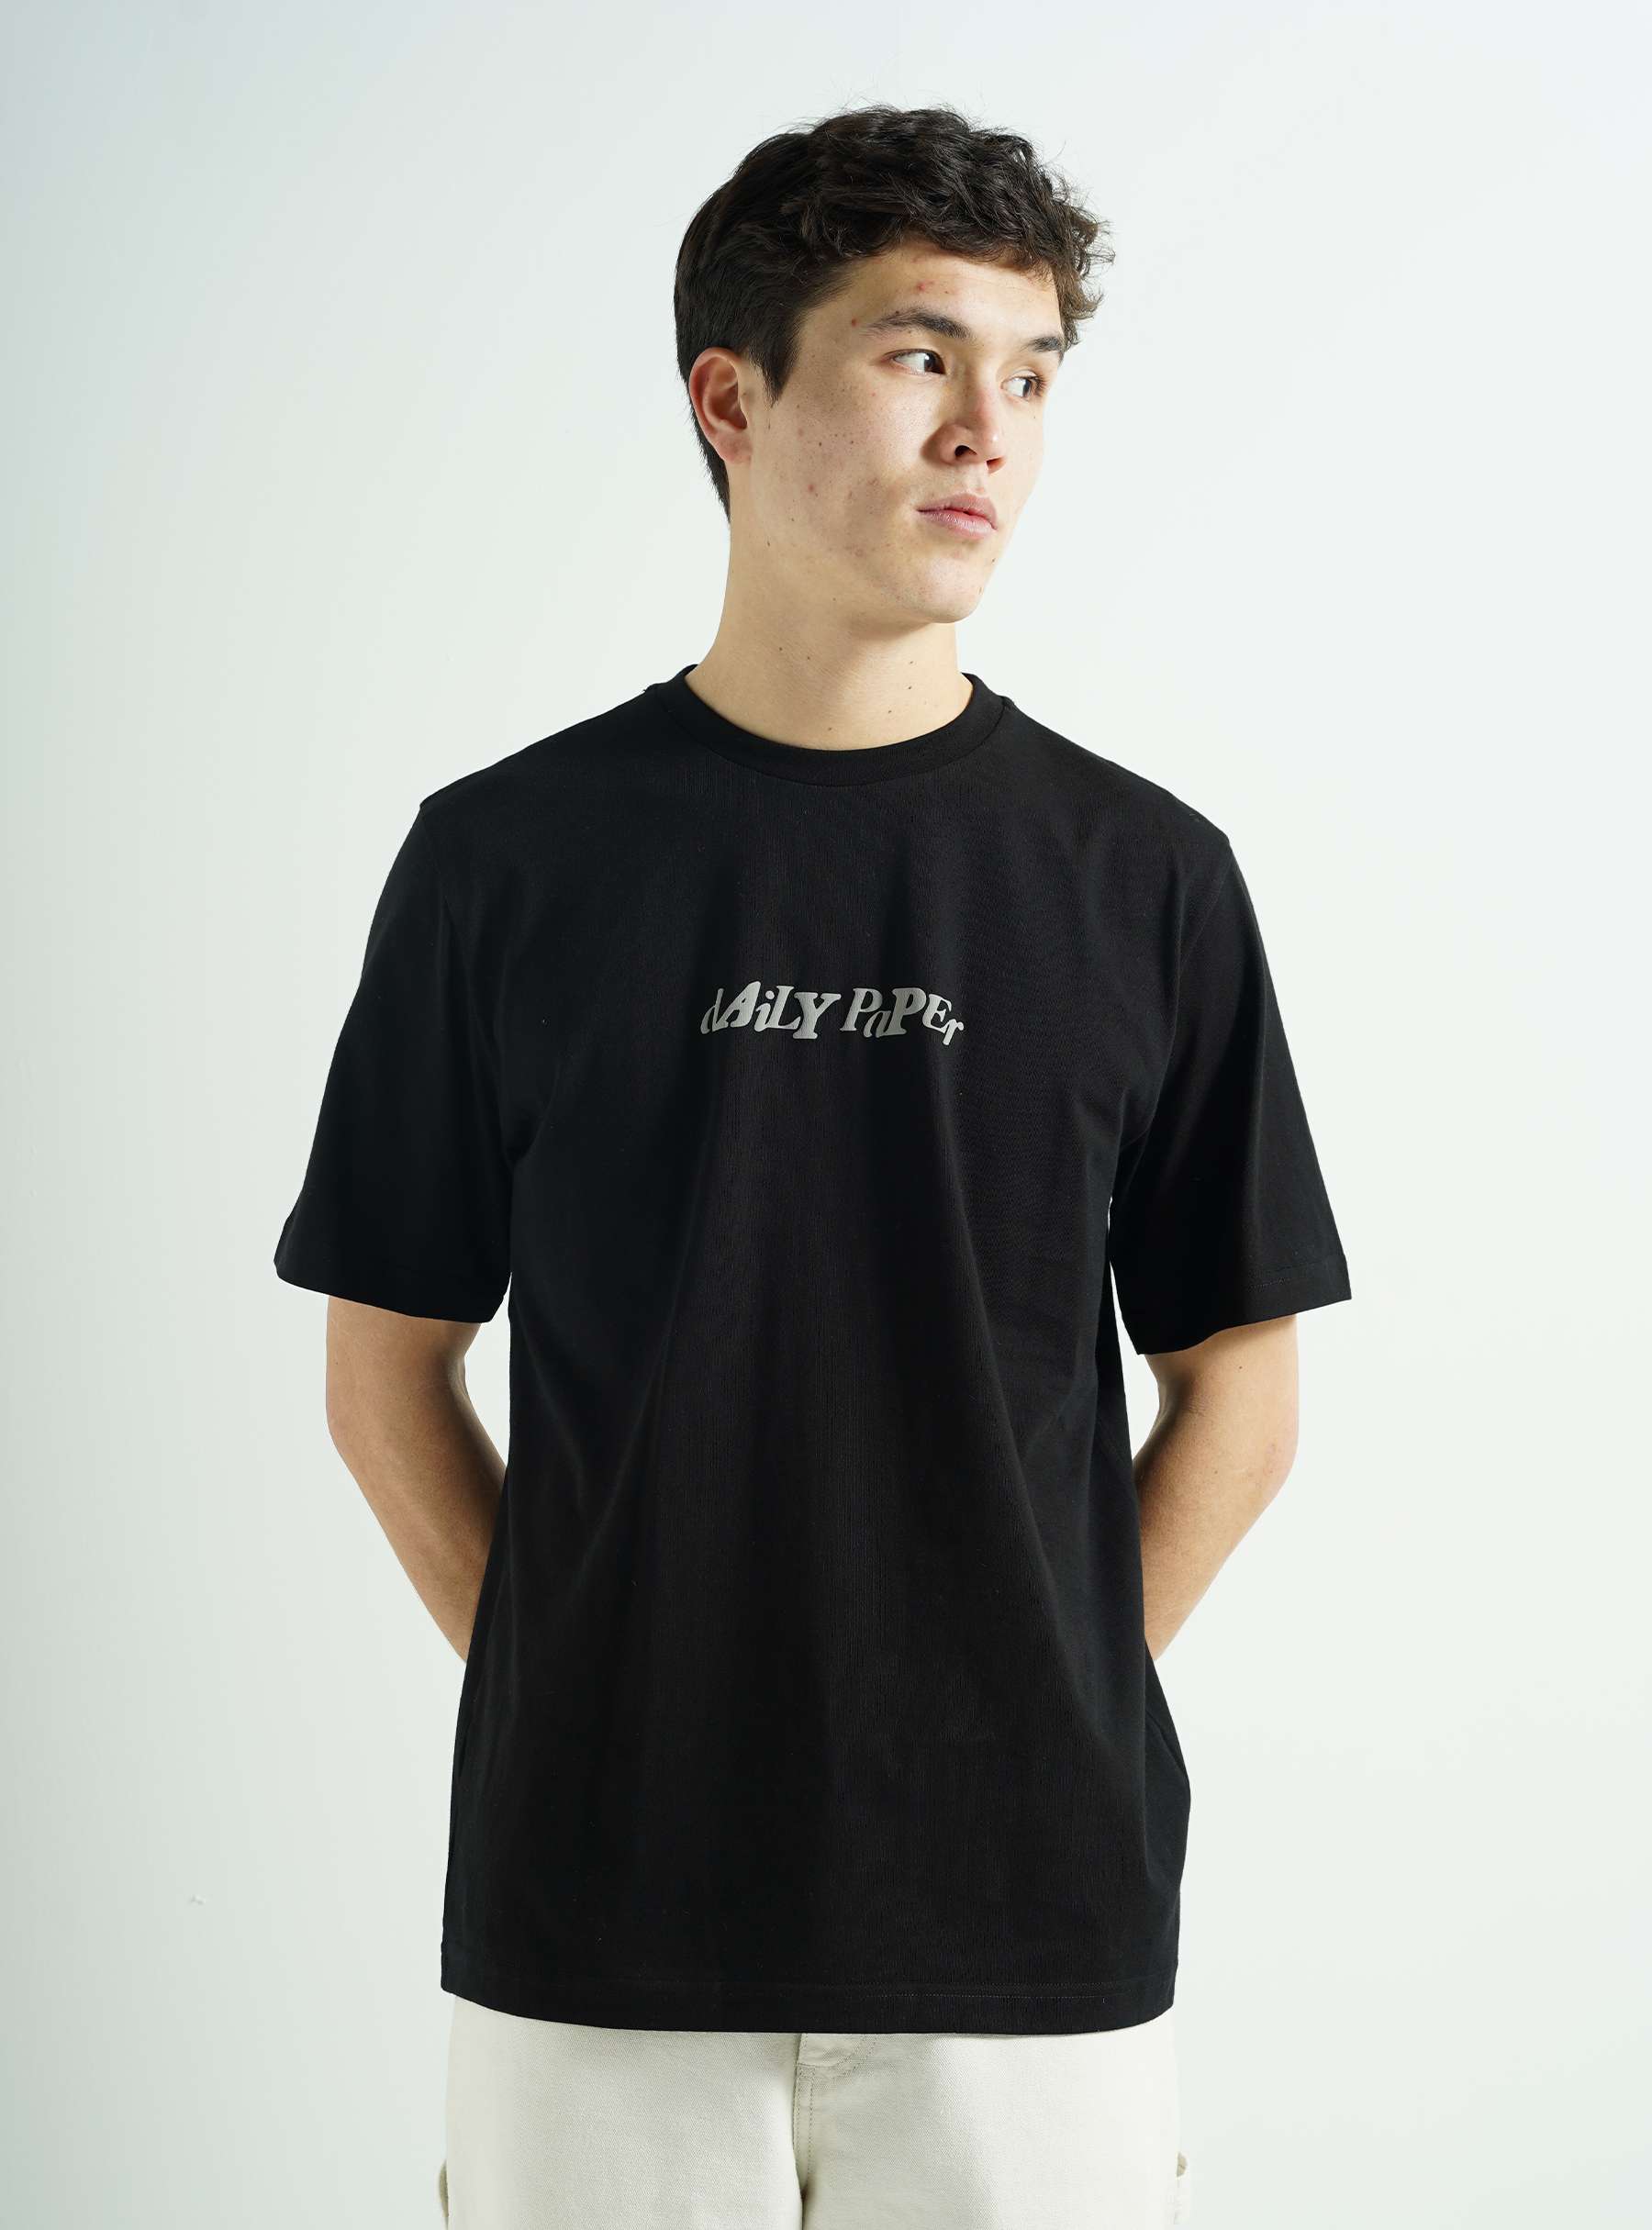 Unified Type SS T-Shirt Black 2411117